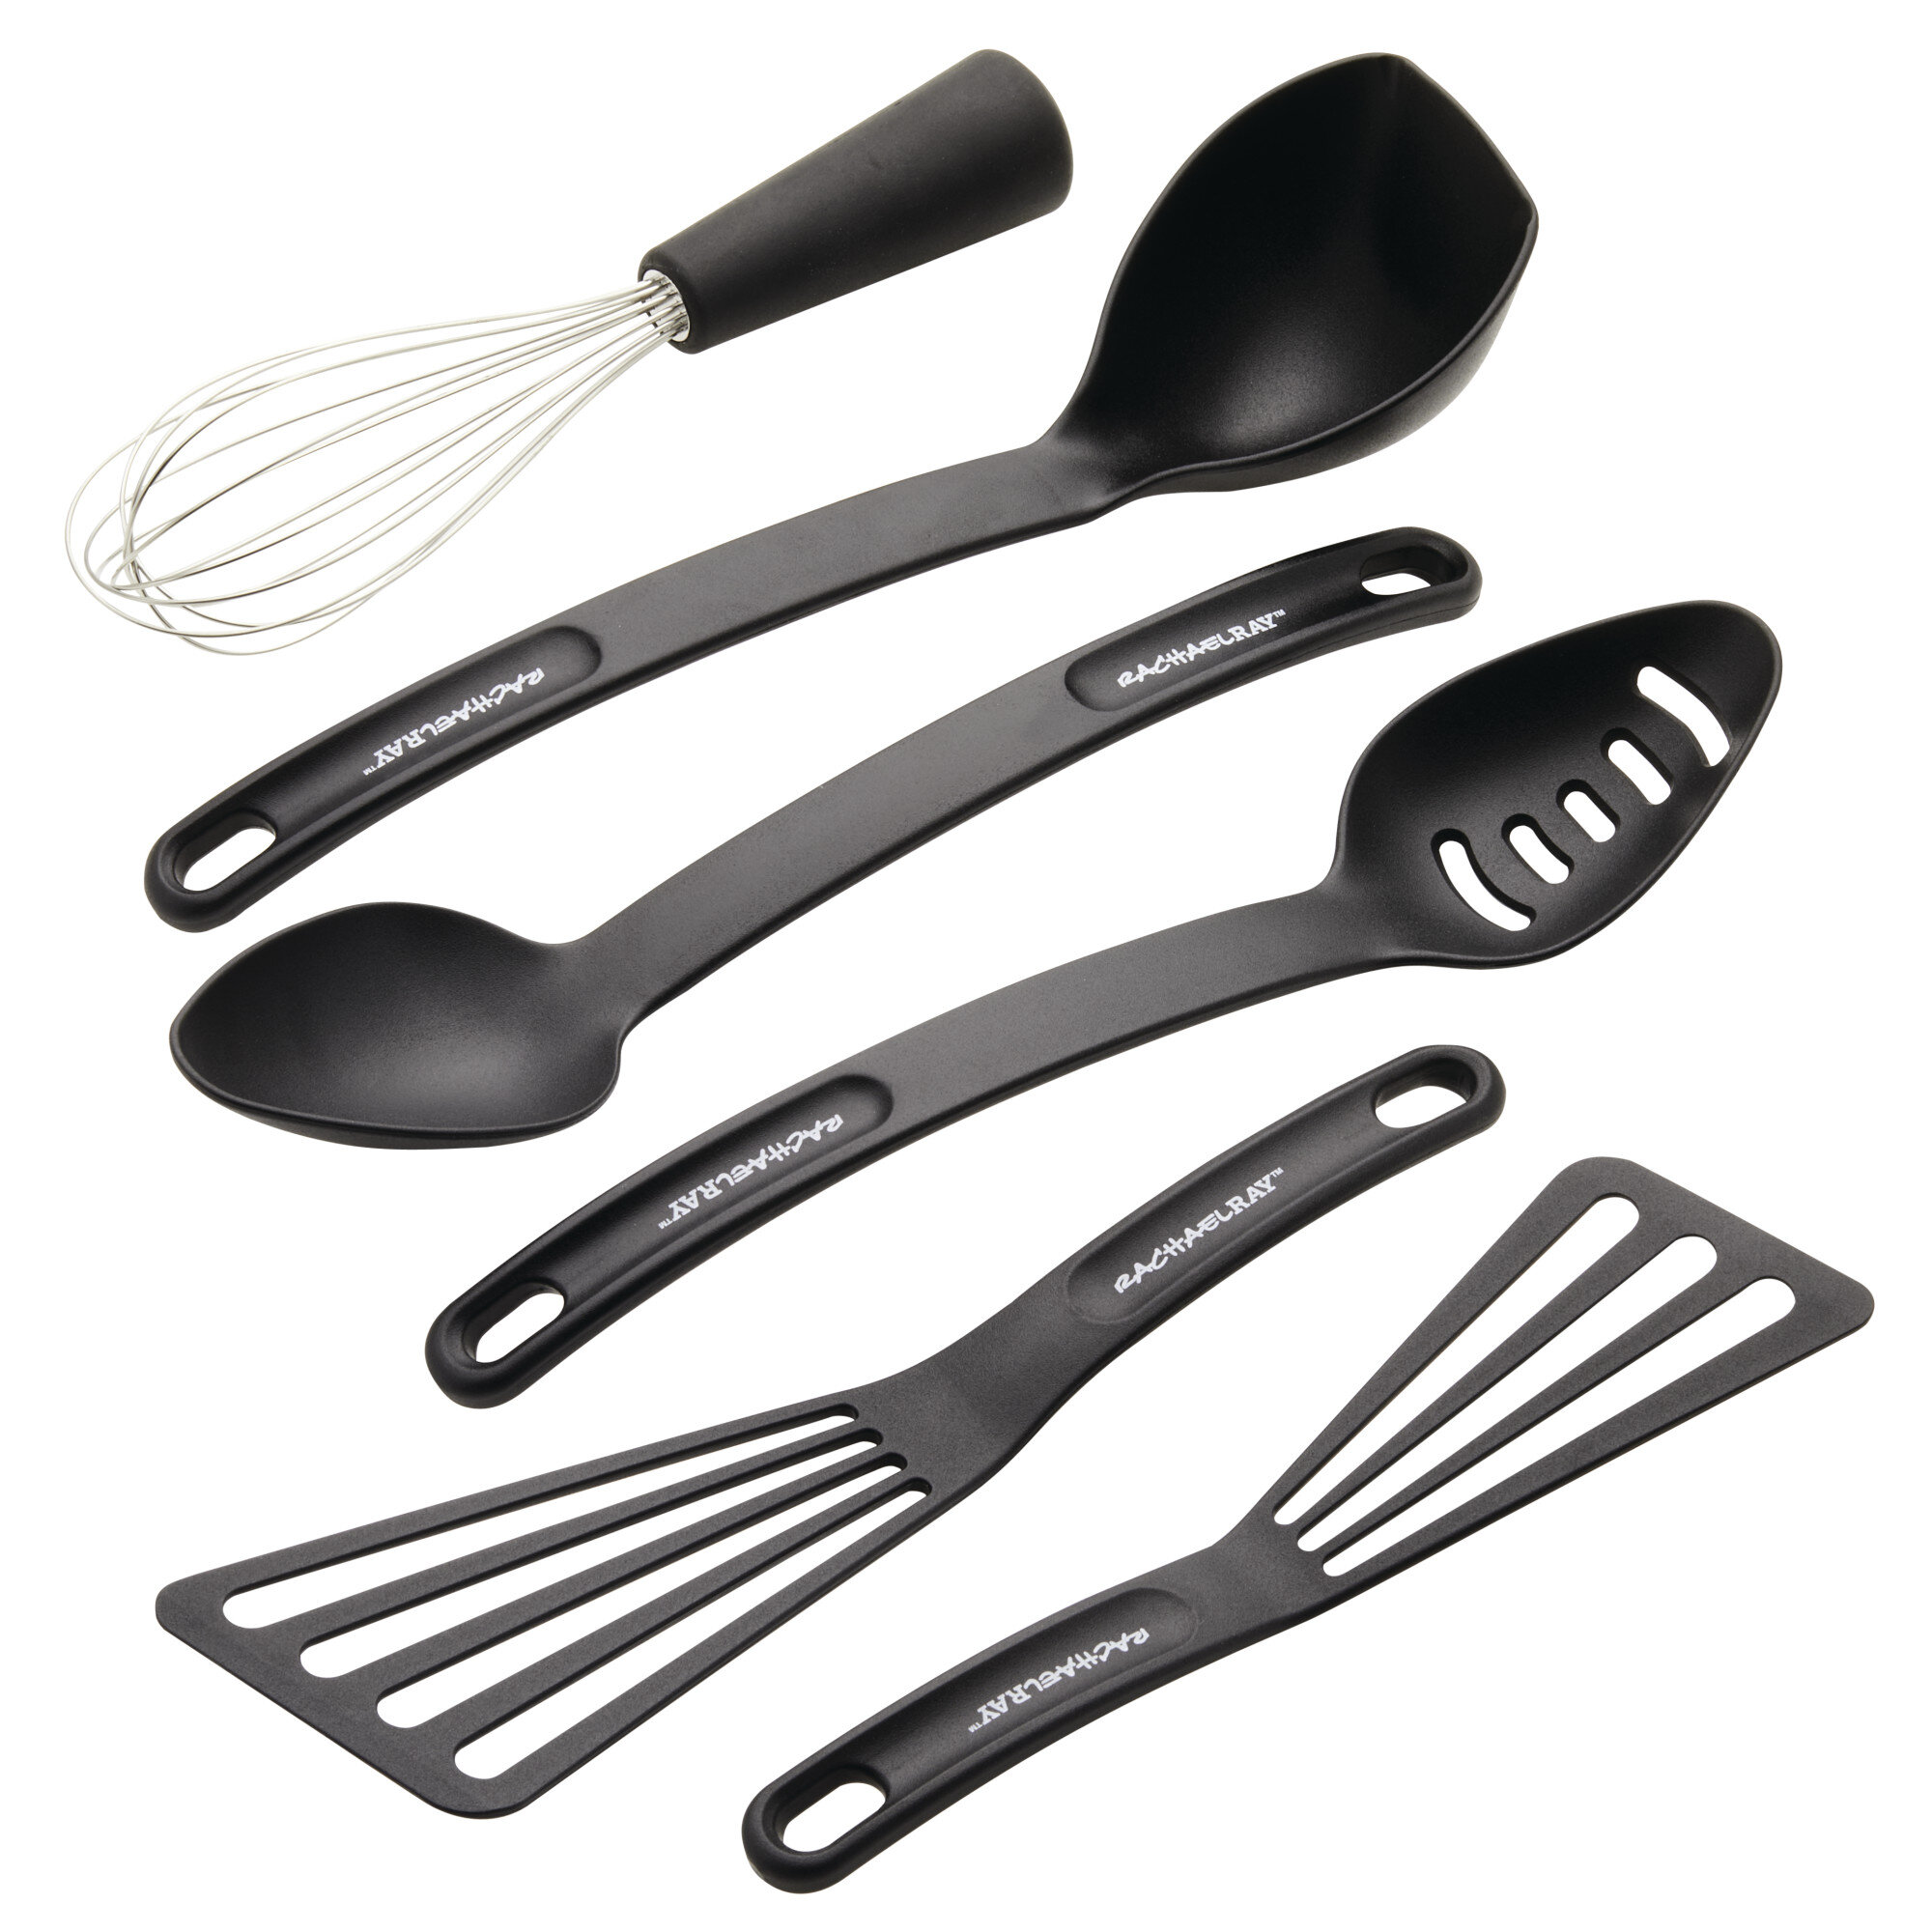 Rachael Ray Tools And Gadgets Kitchen Utensil Set, 6-piece, Black